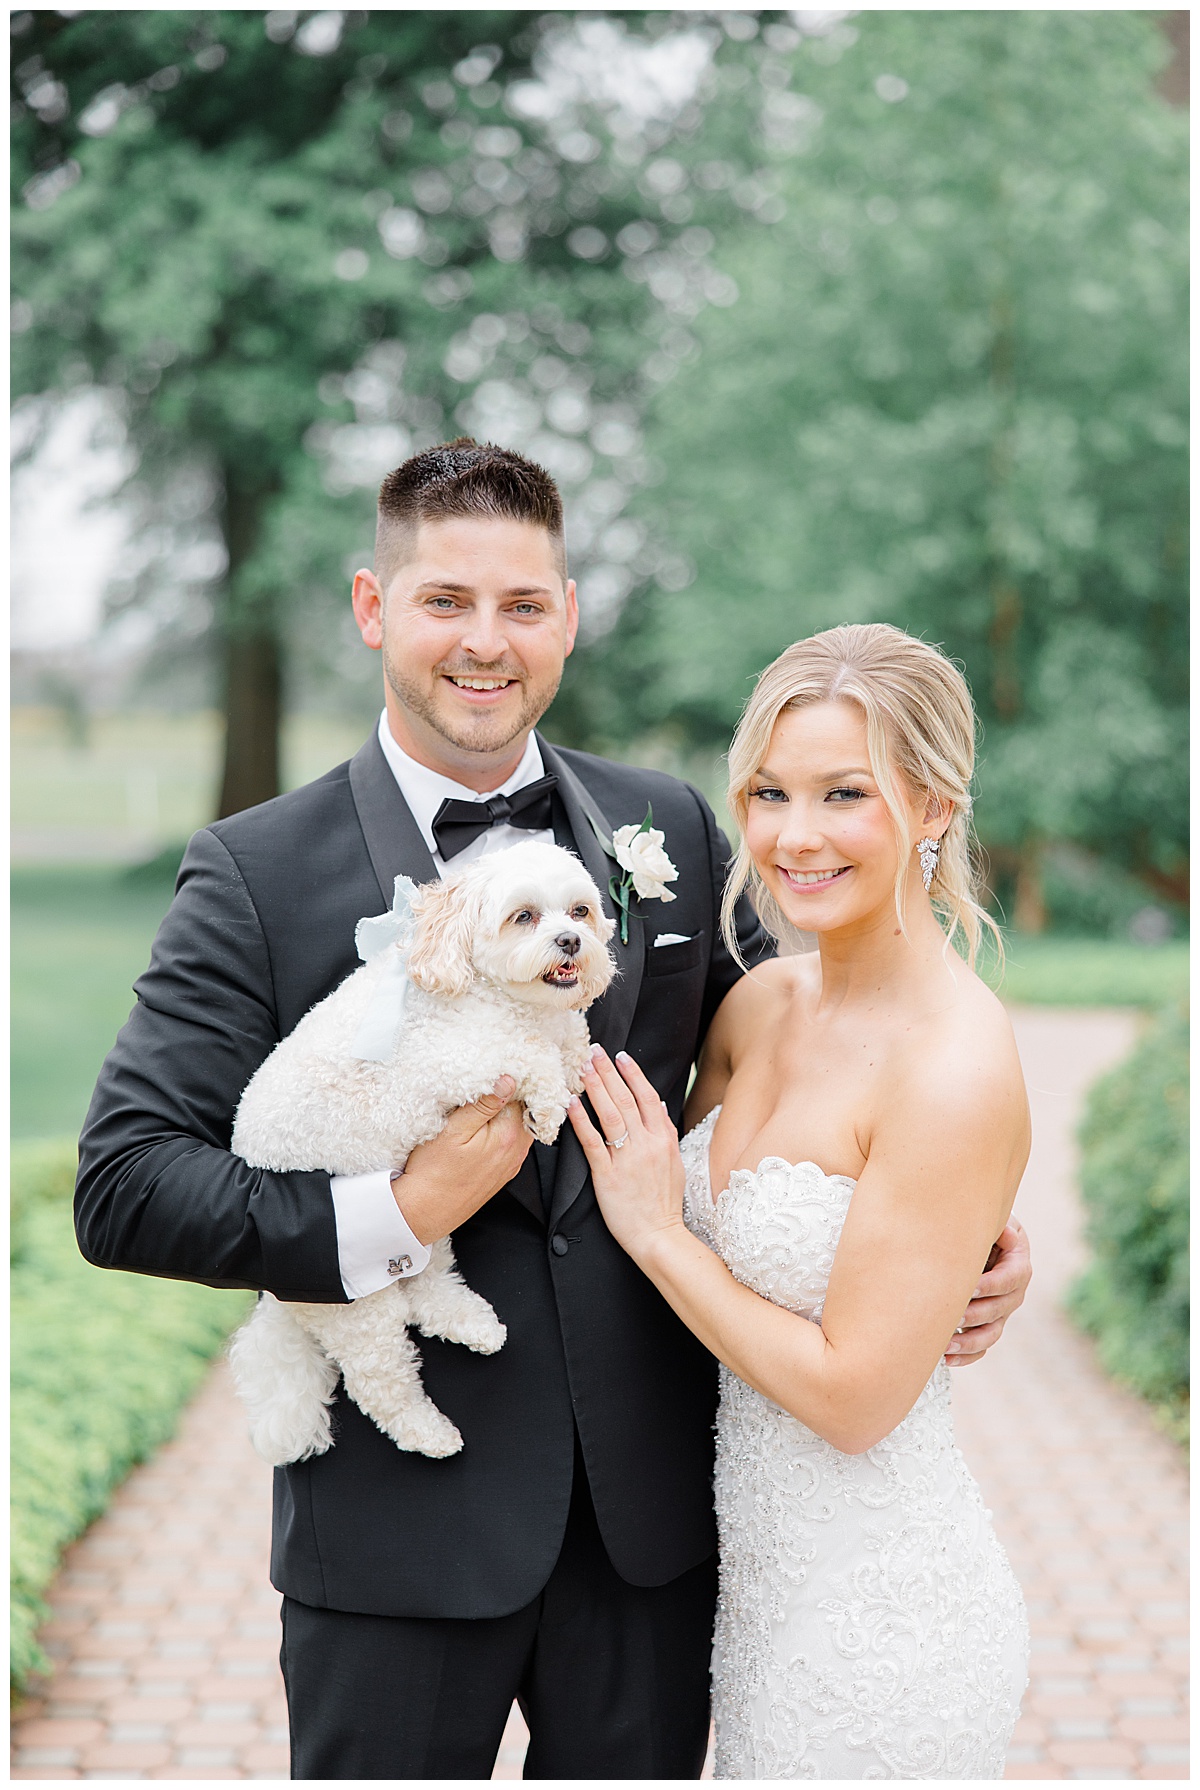 Bride and From with dog on wedding day 